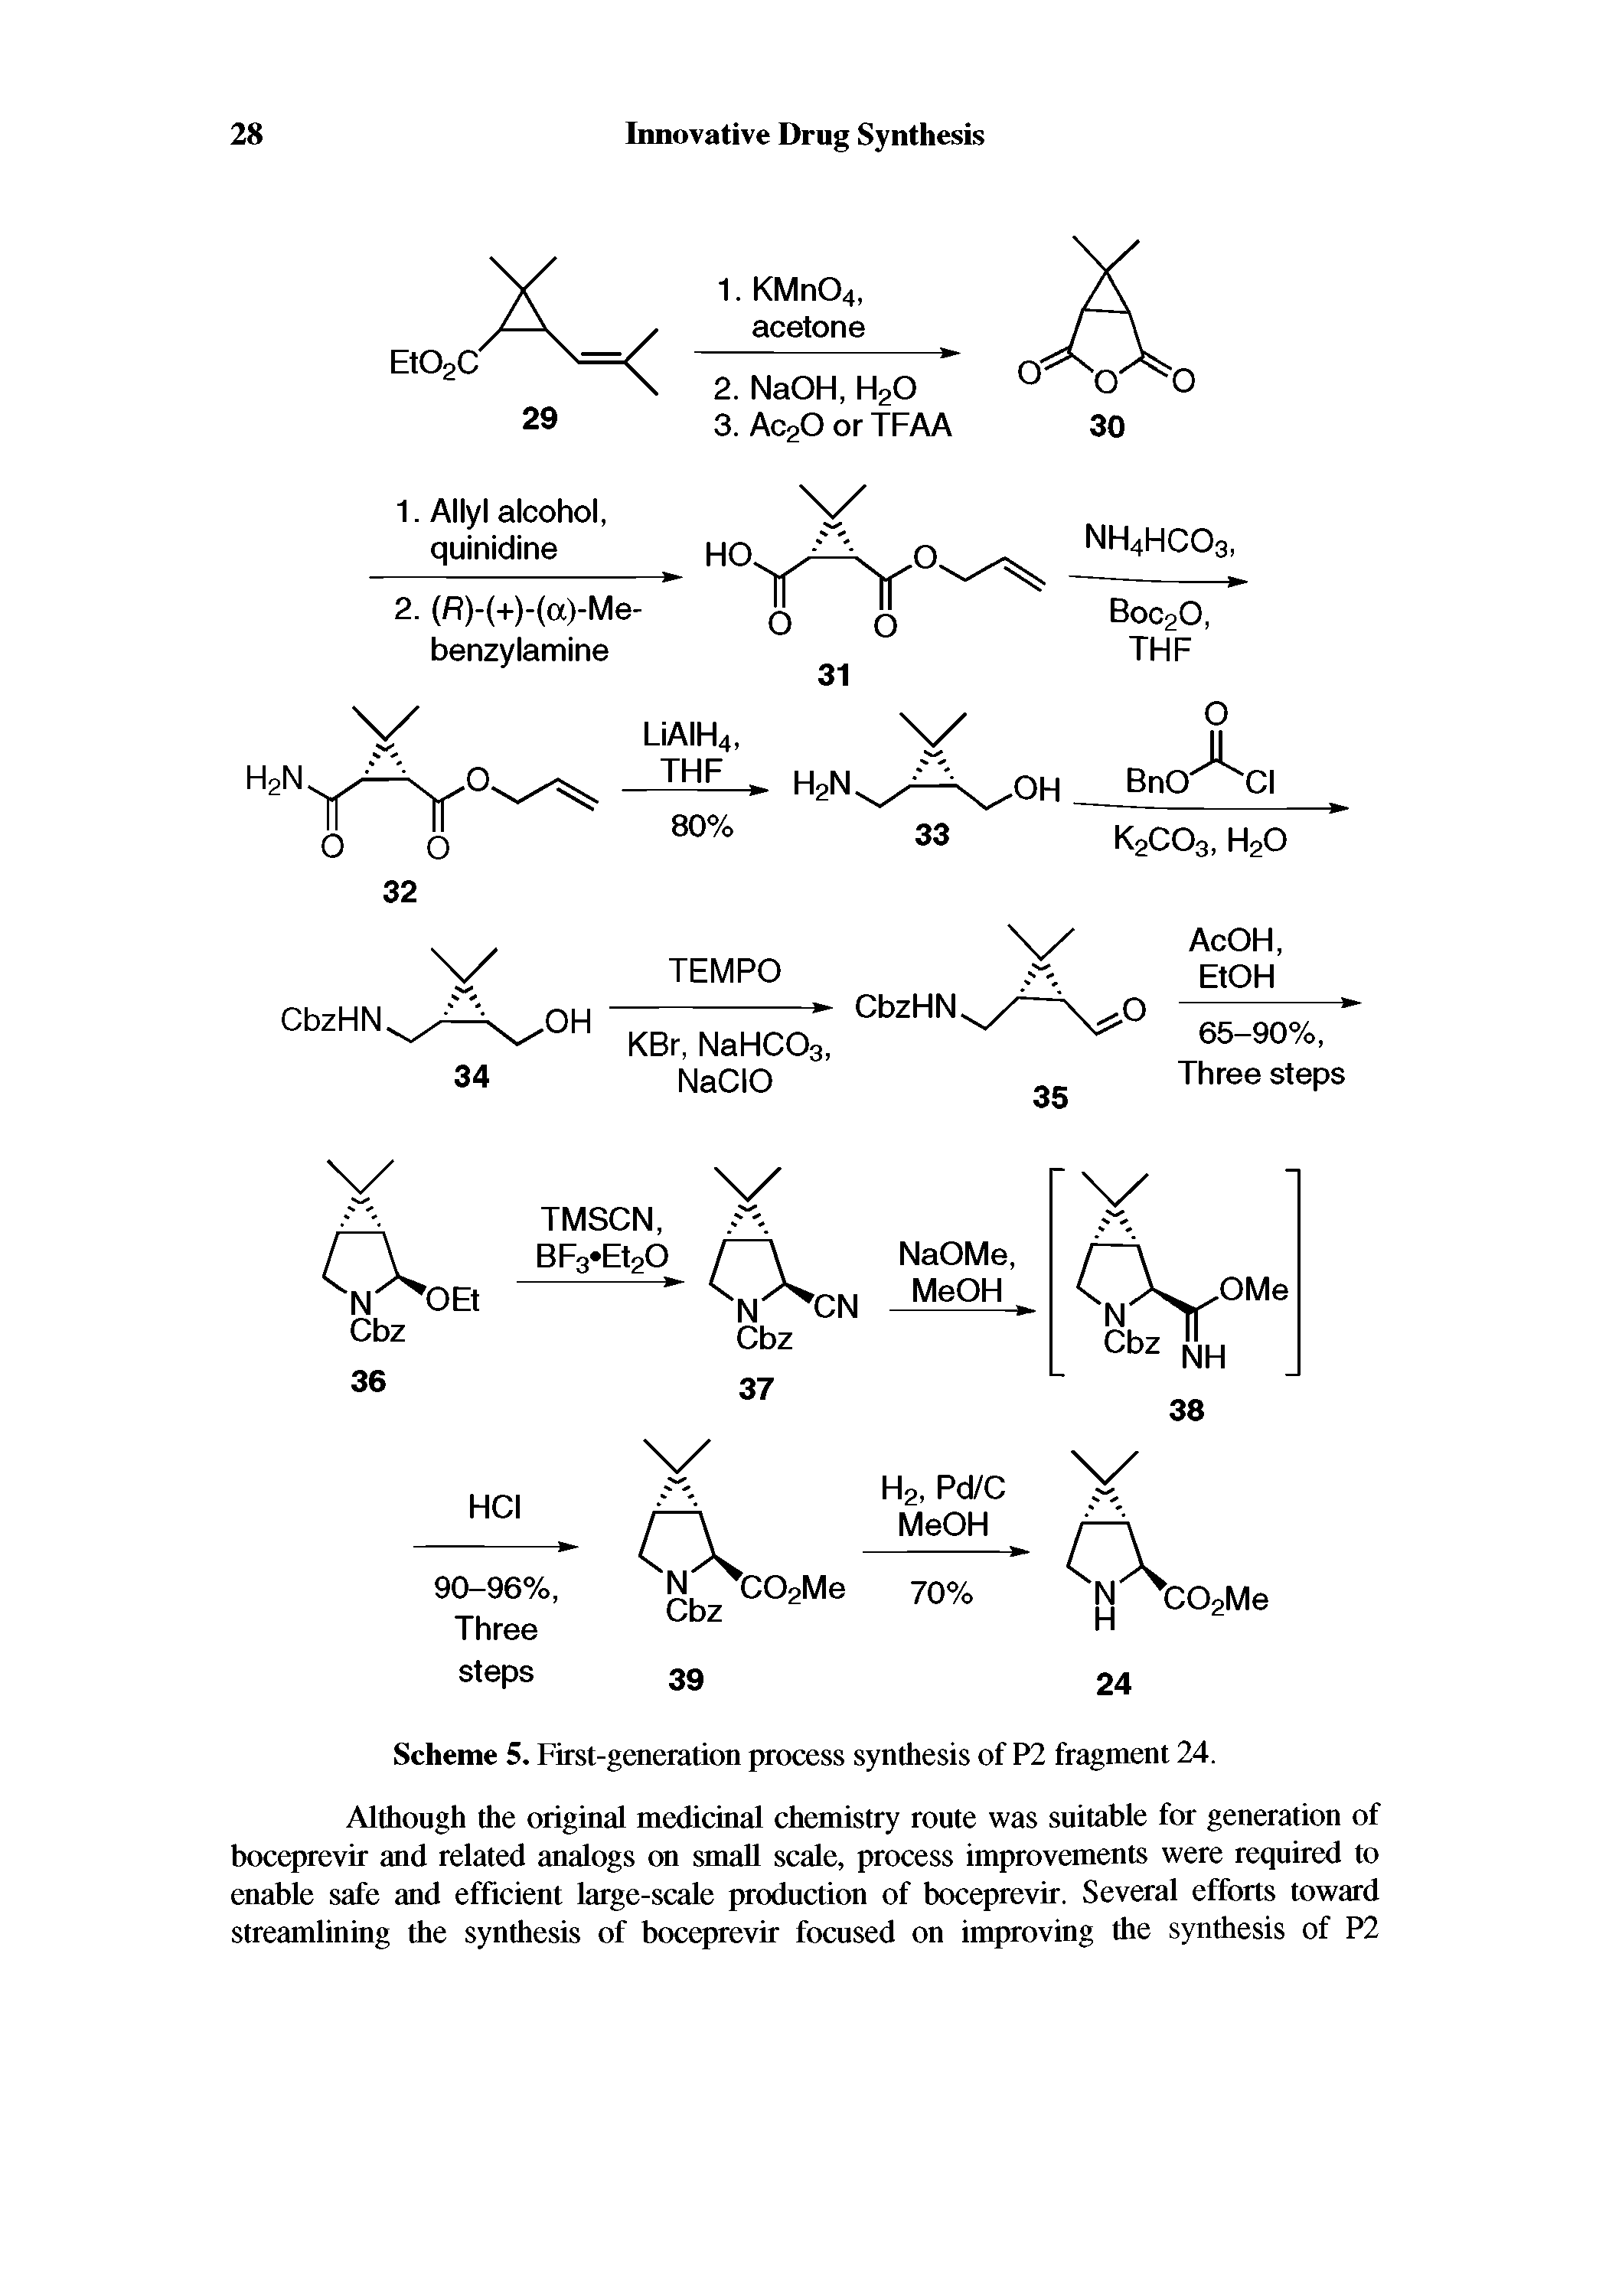 Scheme 5. First-generation process synthesis of P2 fragment 24.